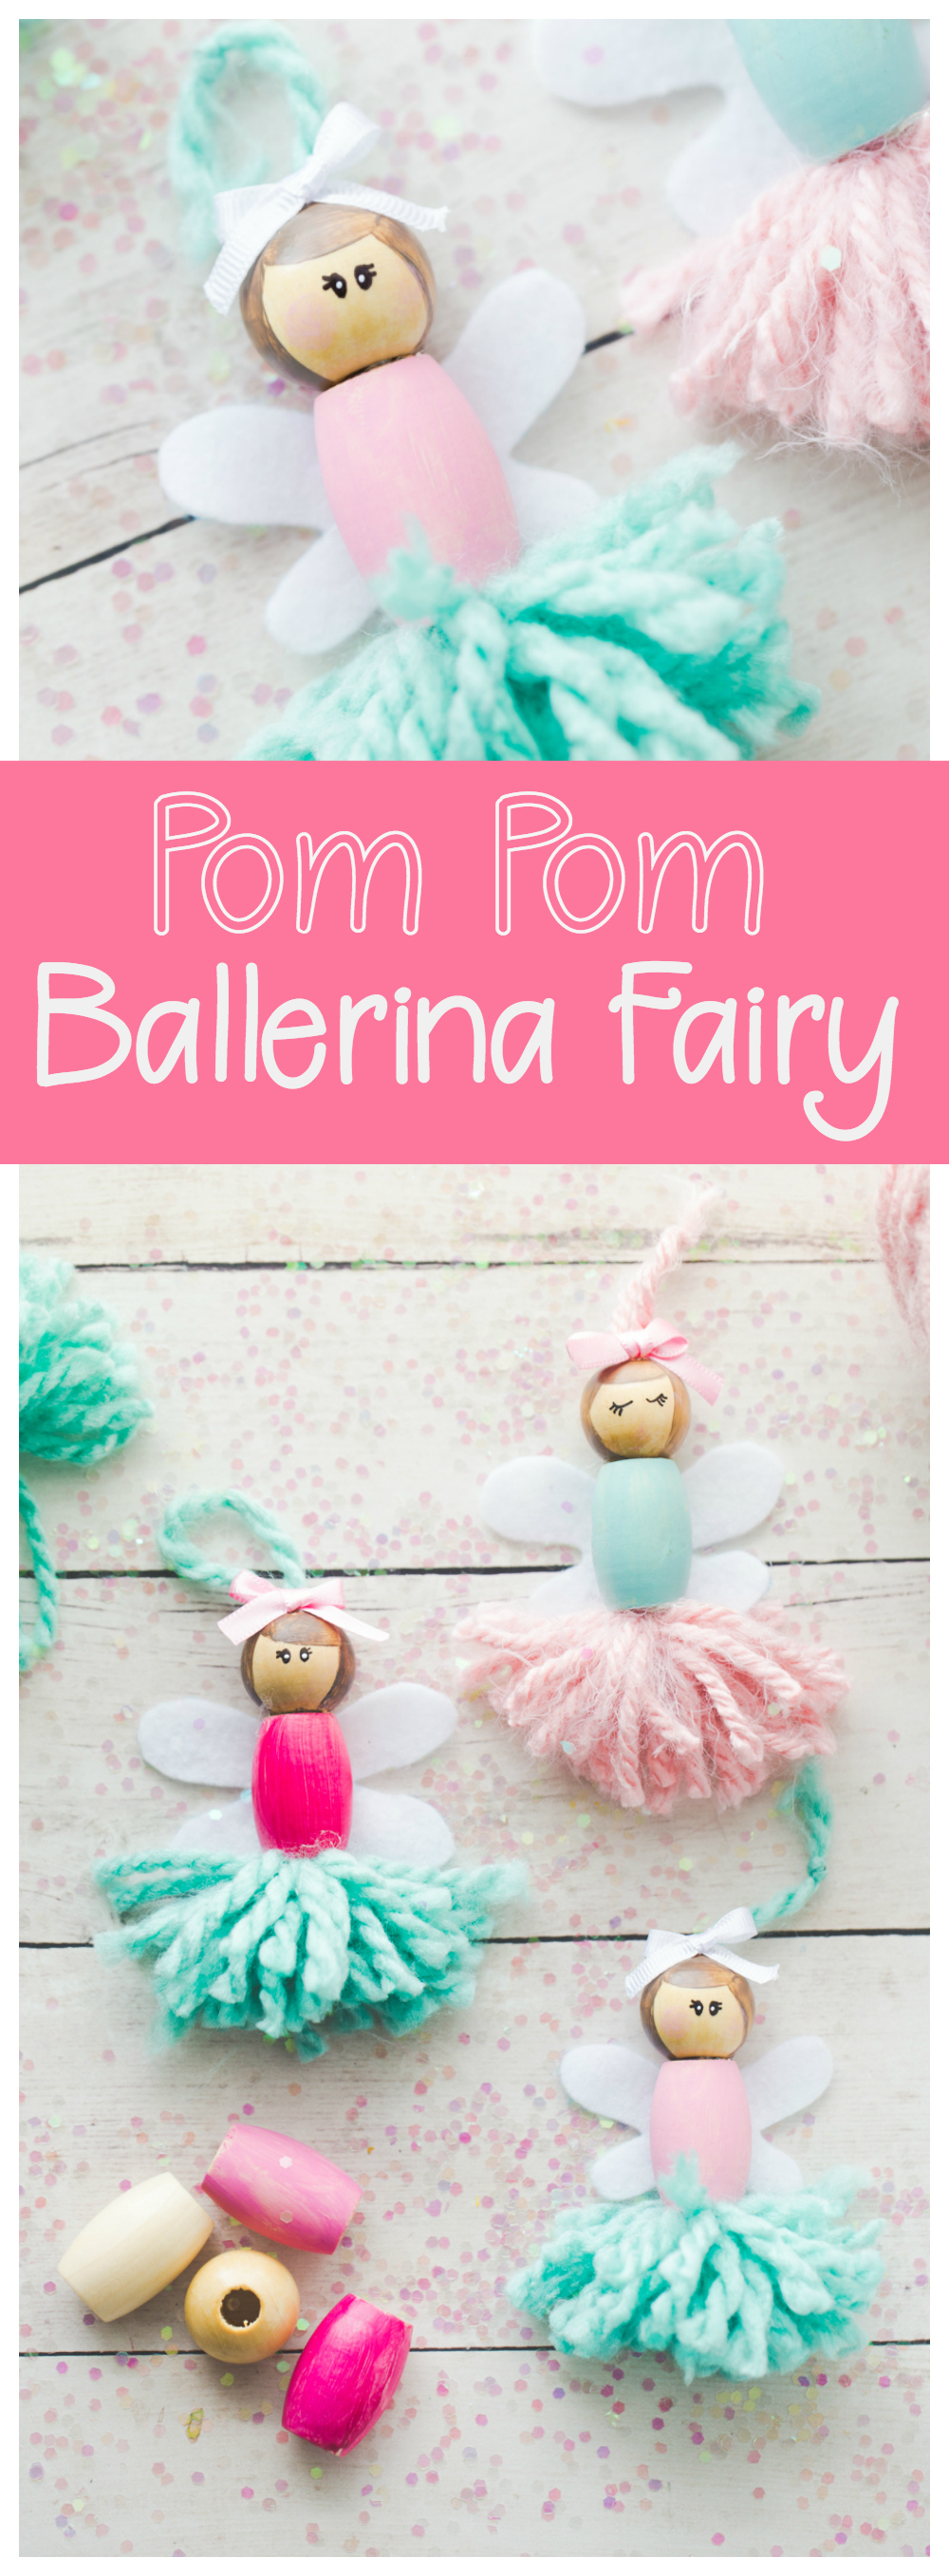 These Pom Pom Ballerina Fairies are the sweetest project for any little girl! They make great little bookshelf decorations or ornaments. 